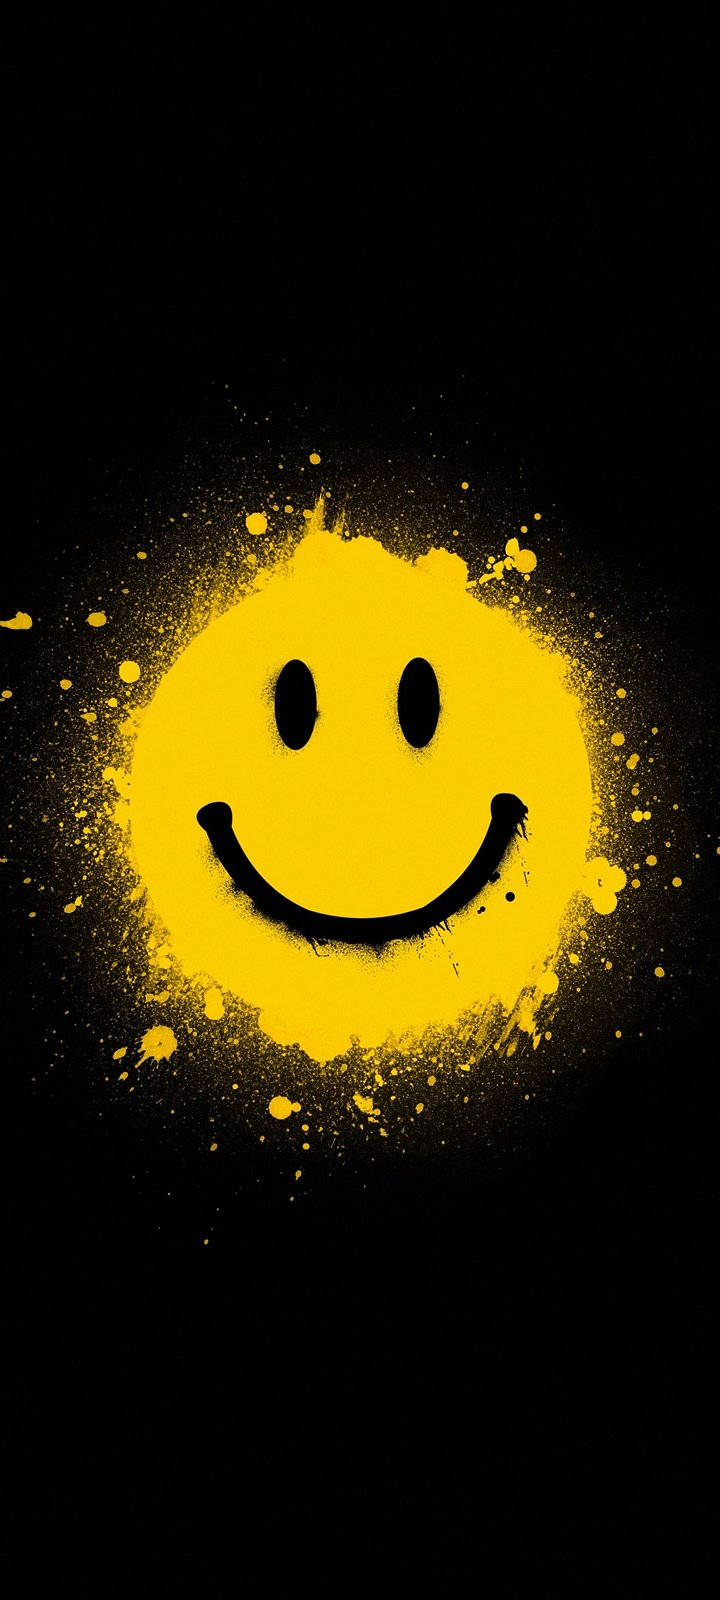 Smiley Face Spray Paint Wallpaper